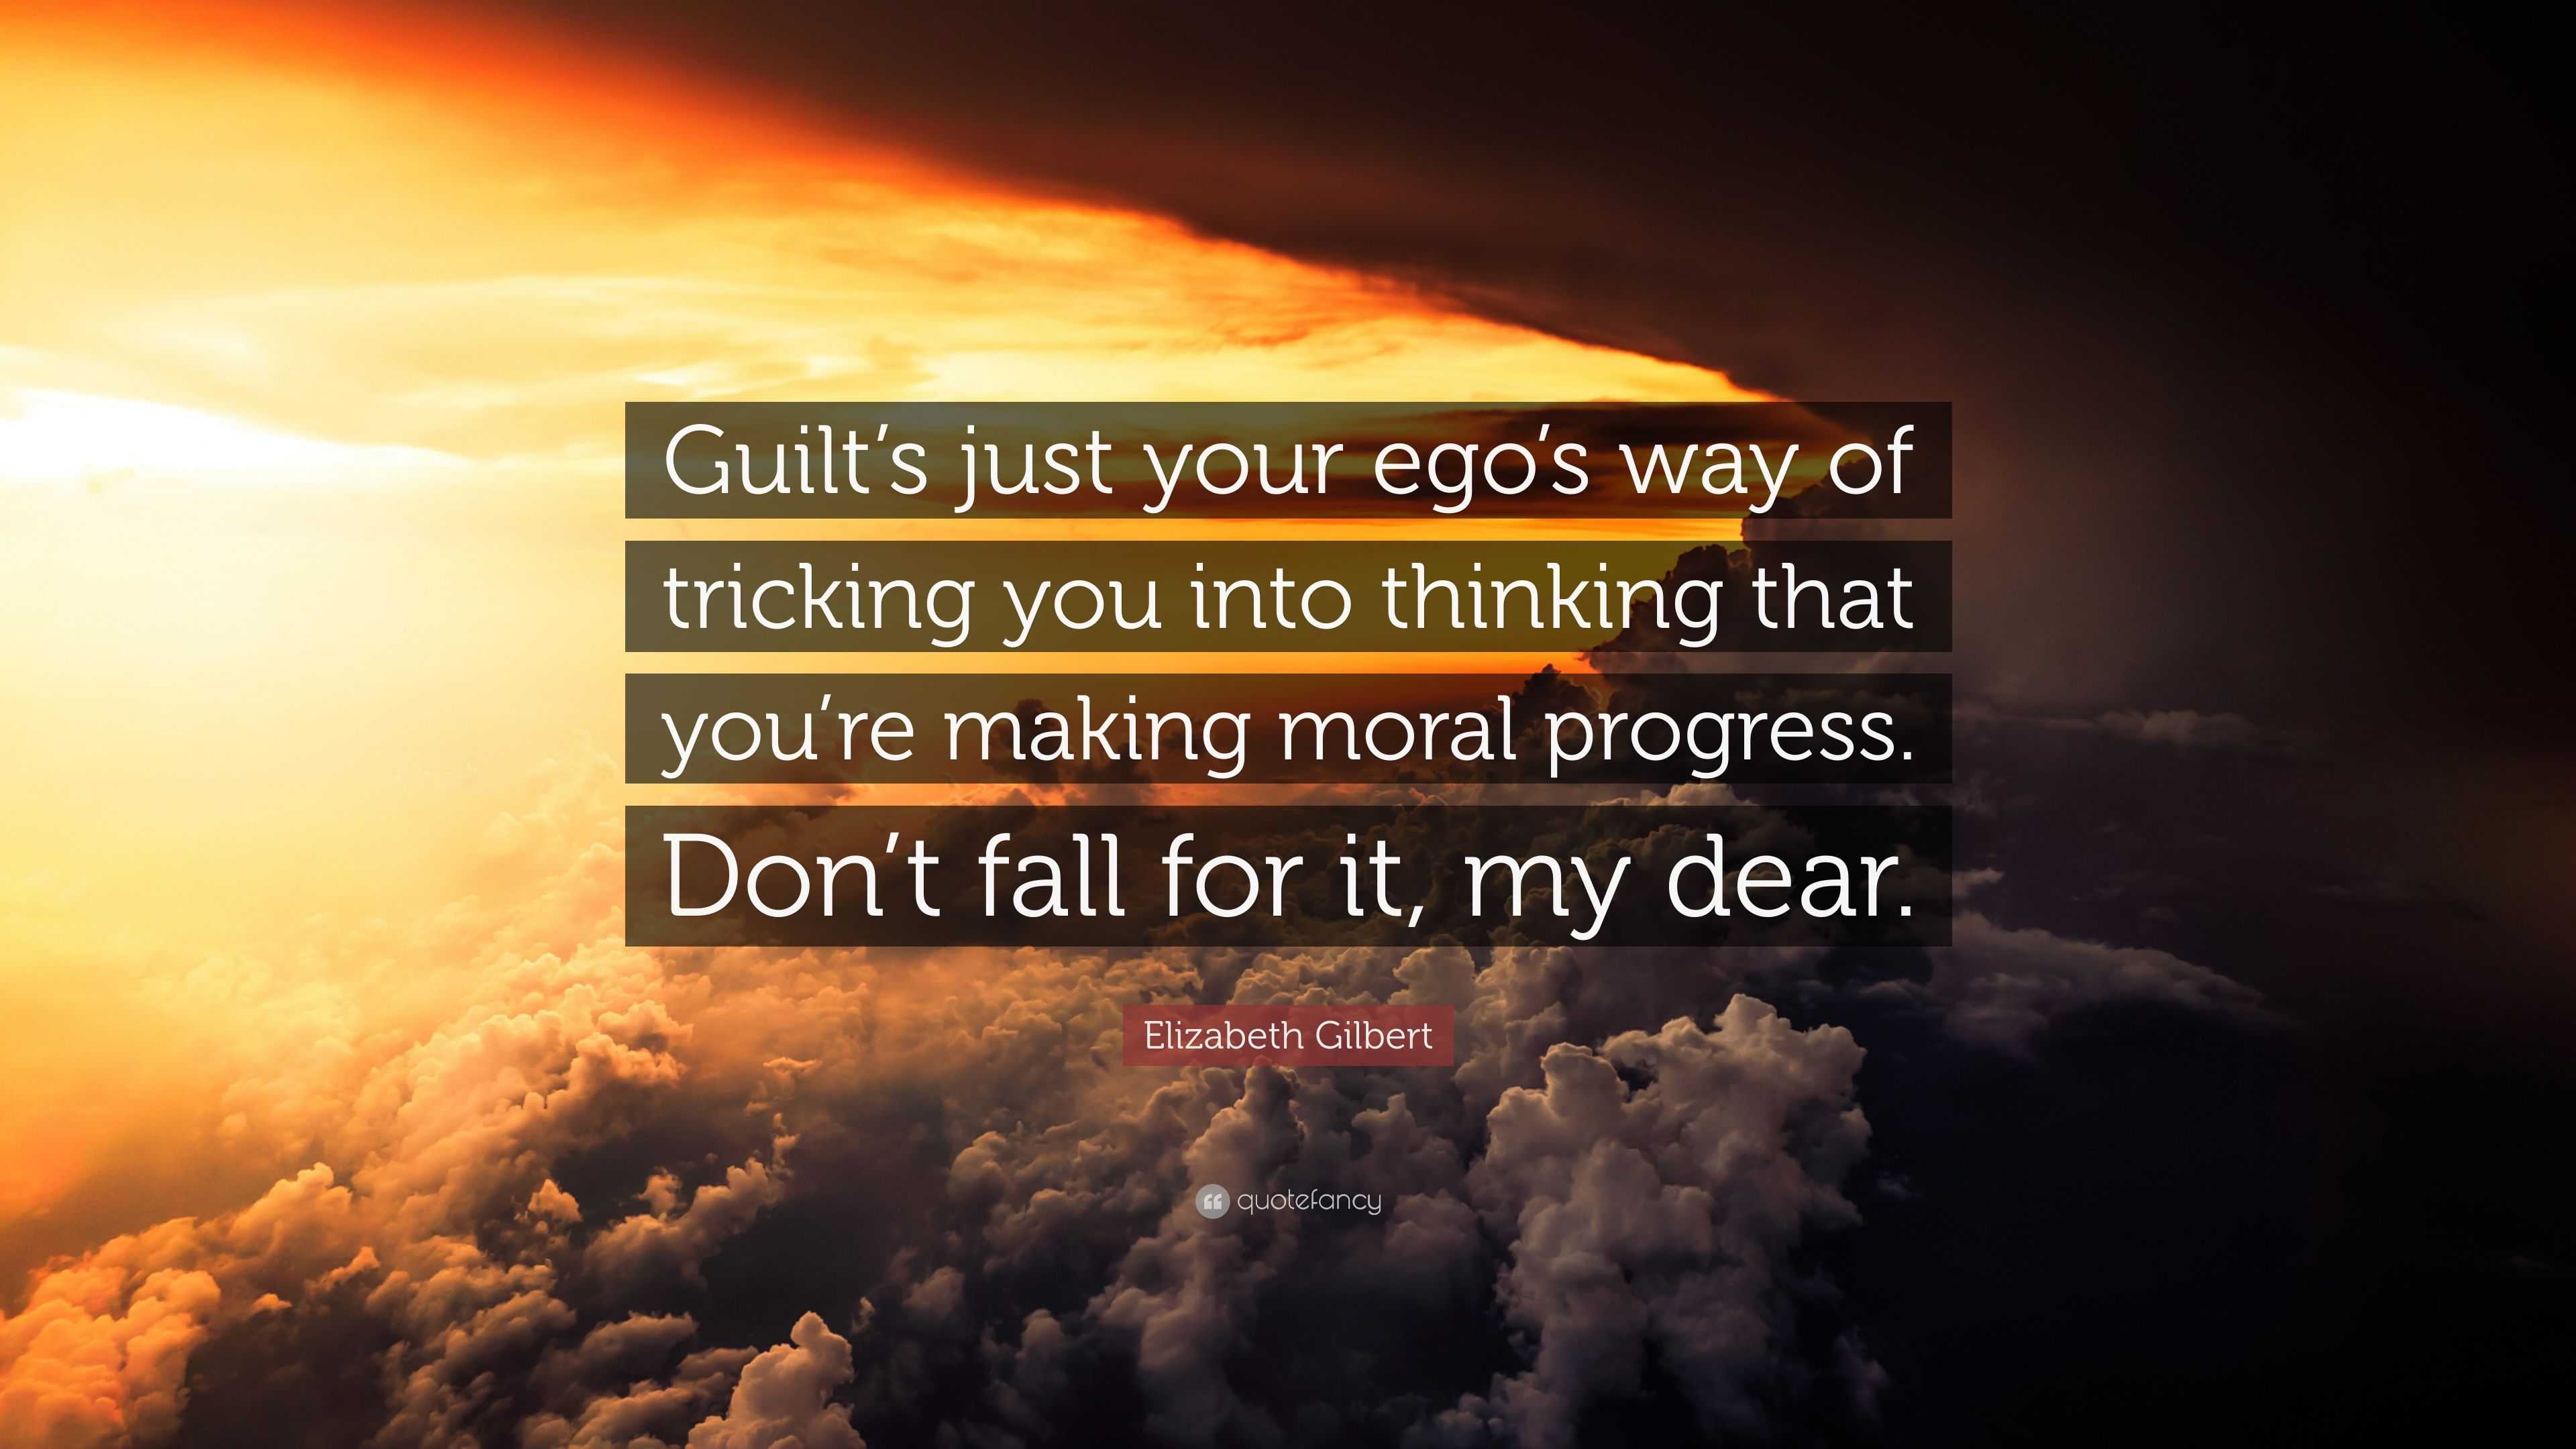 Elizabeth Gilbert Quote: “Guilt’s just your ego’s way of tricking you ...